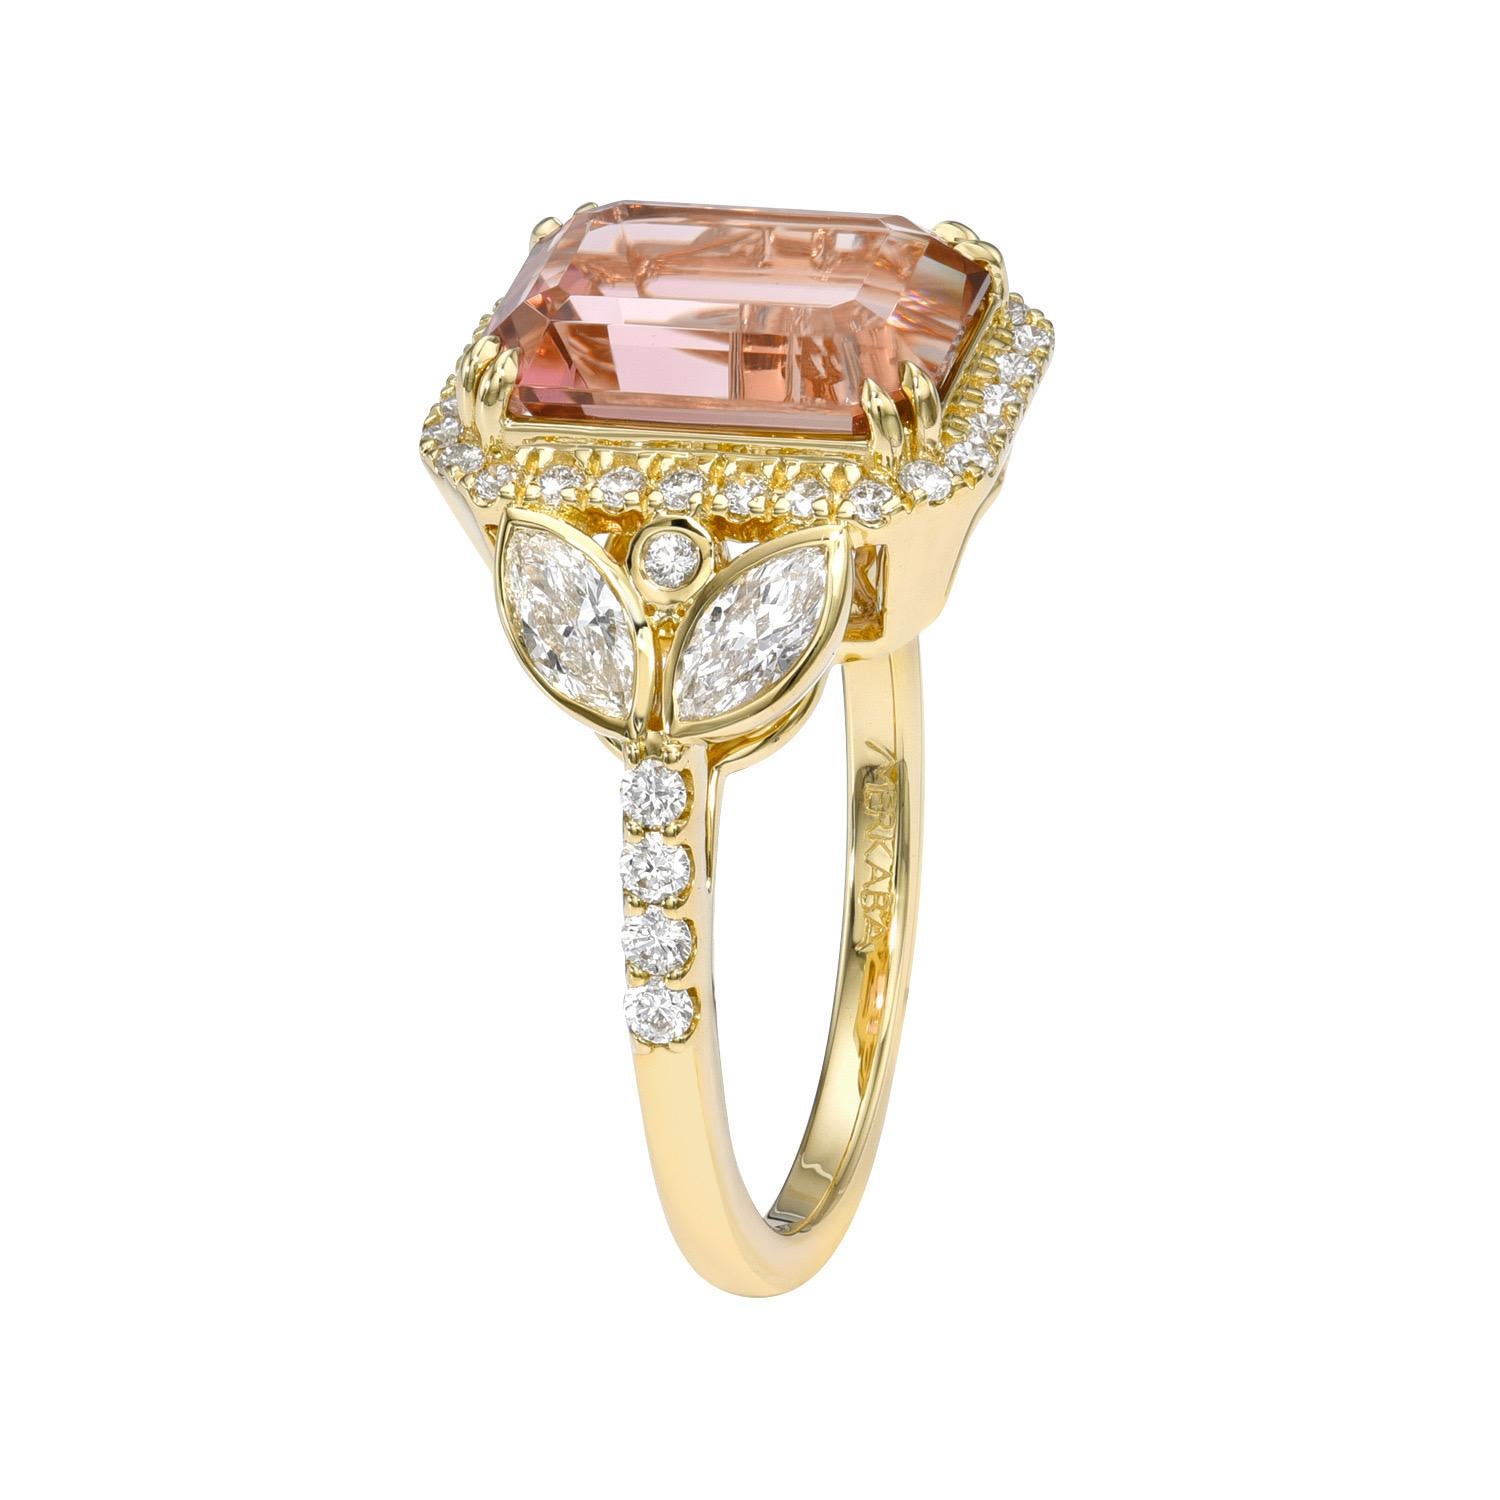 Splendid 4.68 carat Pink Tourmaline Emerald Cut, 18K yellow gold ring, decorated with a total of 0.52 carat collection Marquise diamonds and 0.38 carat round brilliant diamonds.
Ring size 6.5. Resizing is complementary upon request.
Returns are